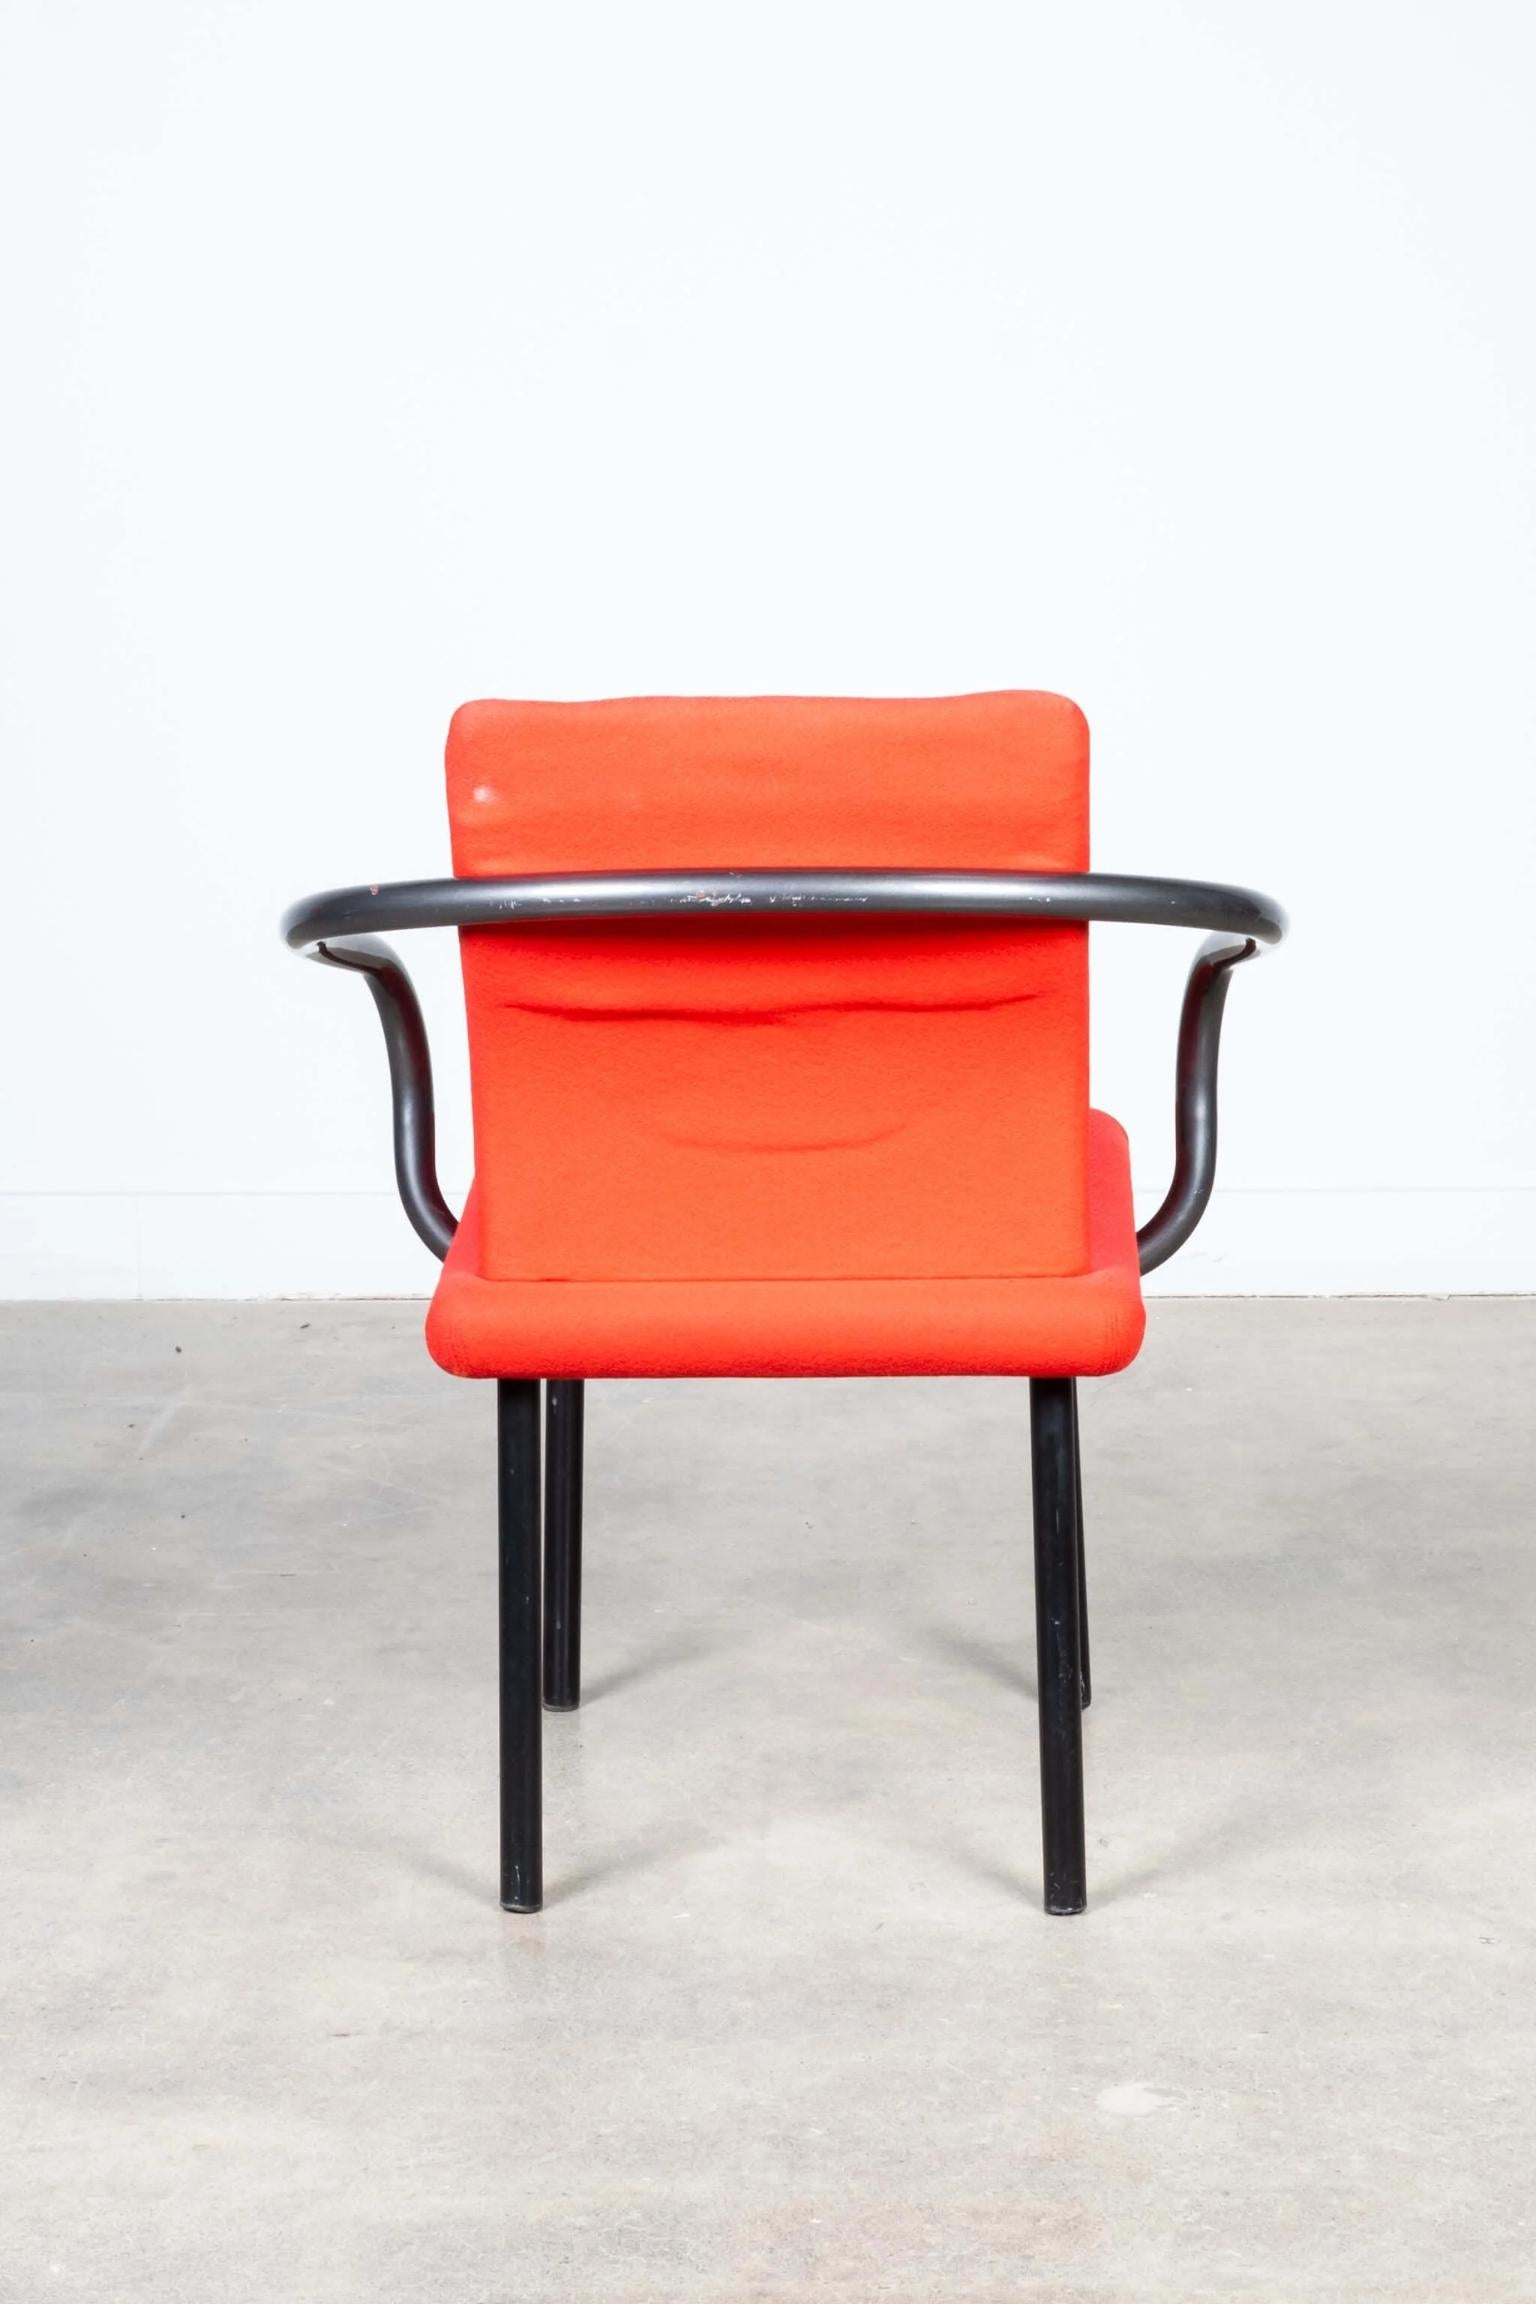 American Ettore Sottsass for Knoll, Set of 6 Mandarin Chairs in Original Red Fabric For Sale